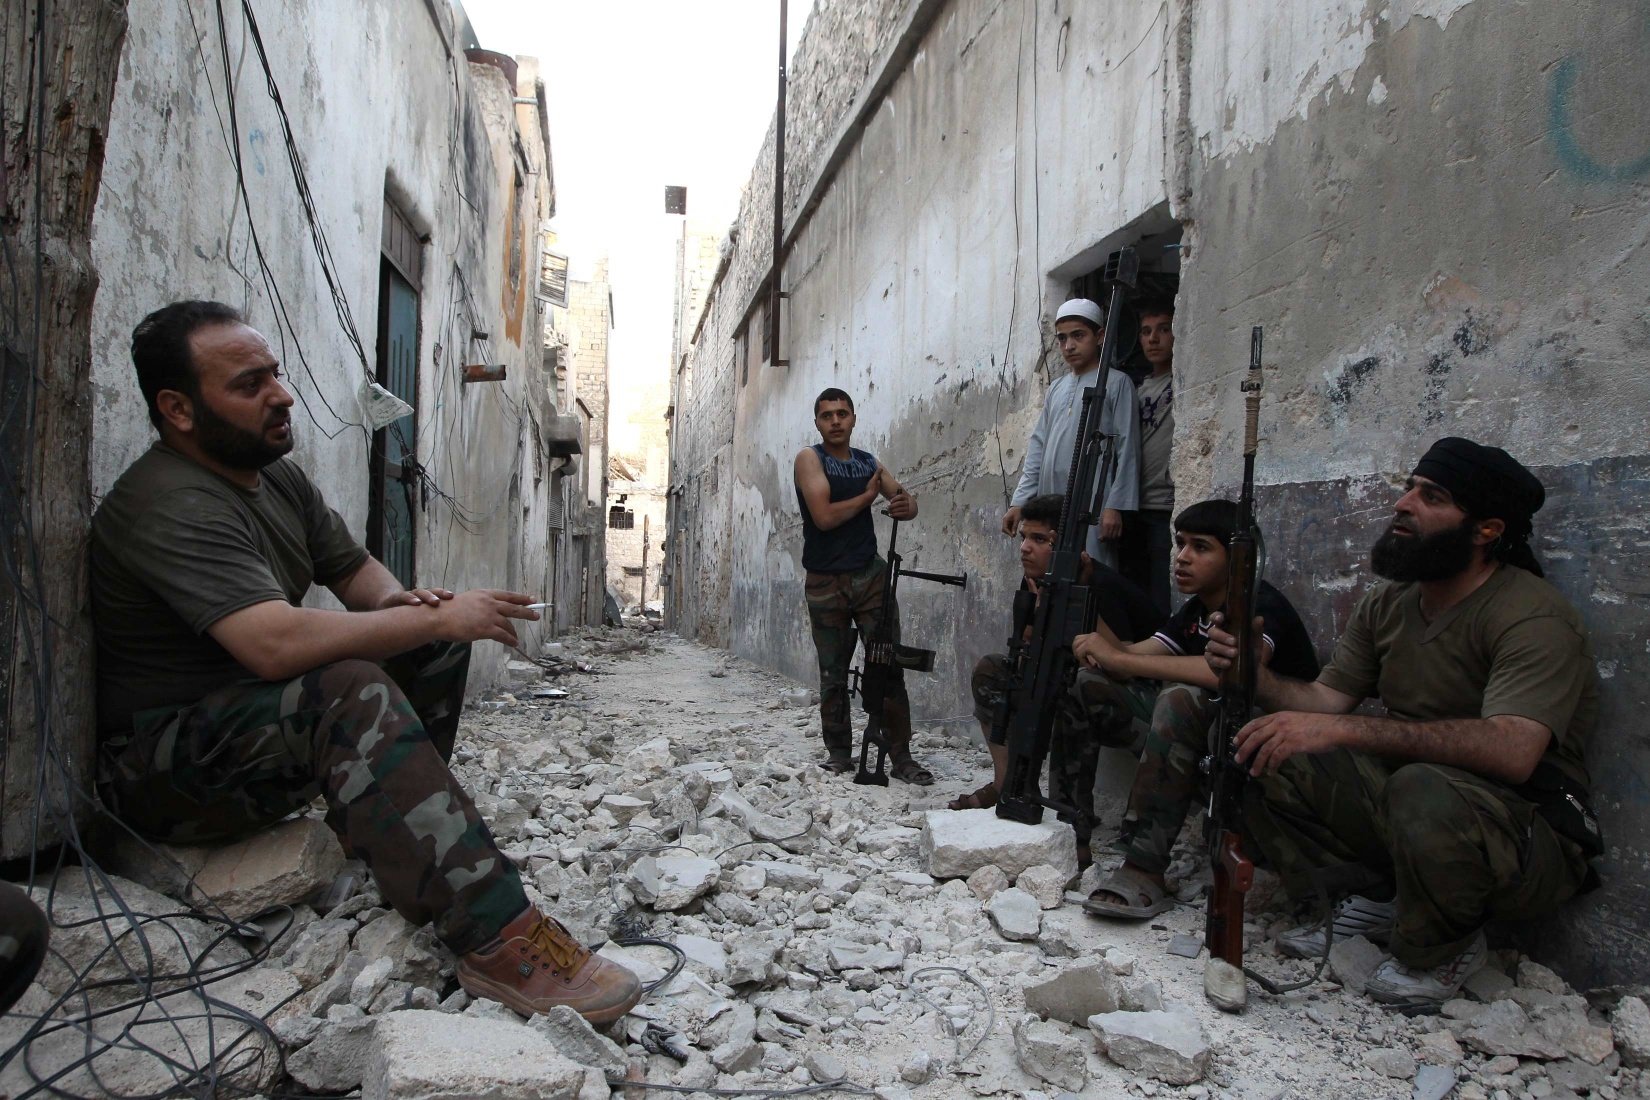 Members of the Free Syrian Army talk as they sit with their weapons in a damaged street in Aleppo's Karm al-Jabal district. A missile strike near Aleppo has killed 26. Photo: Reuters